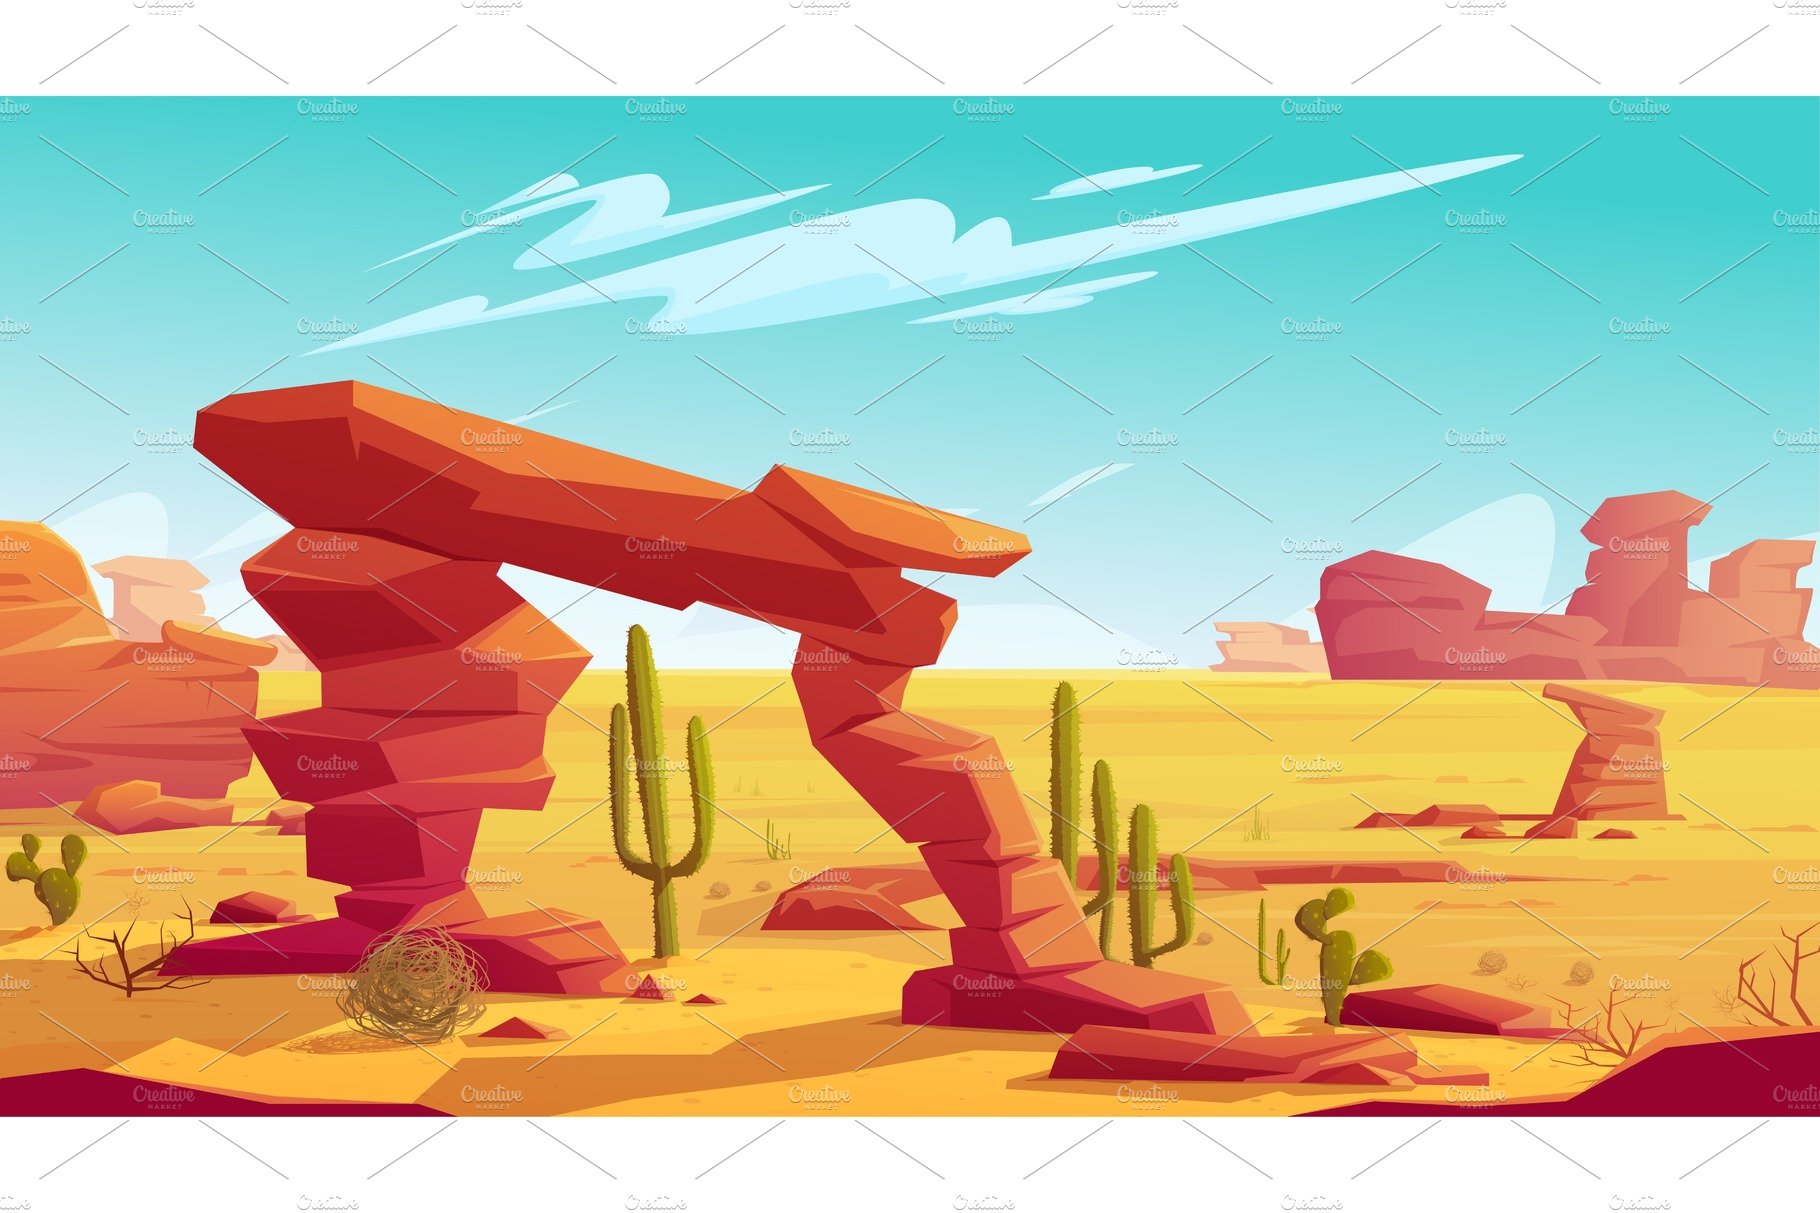 Desert arch and tumbleweed on cover image.